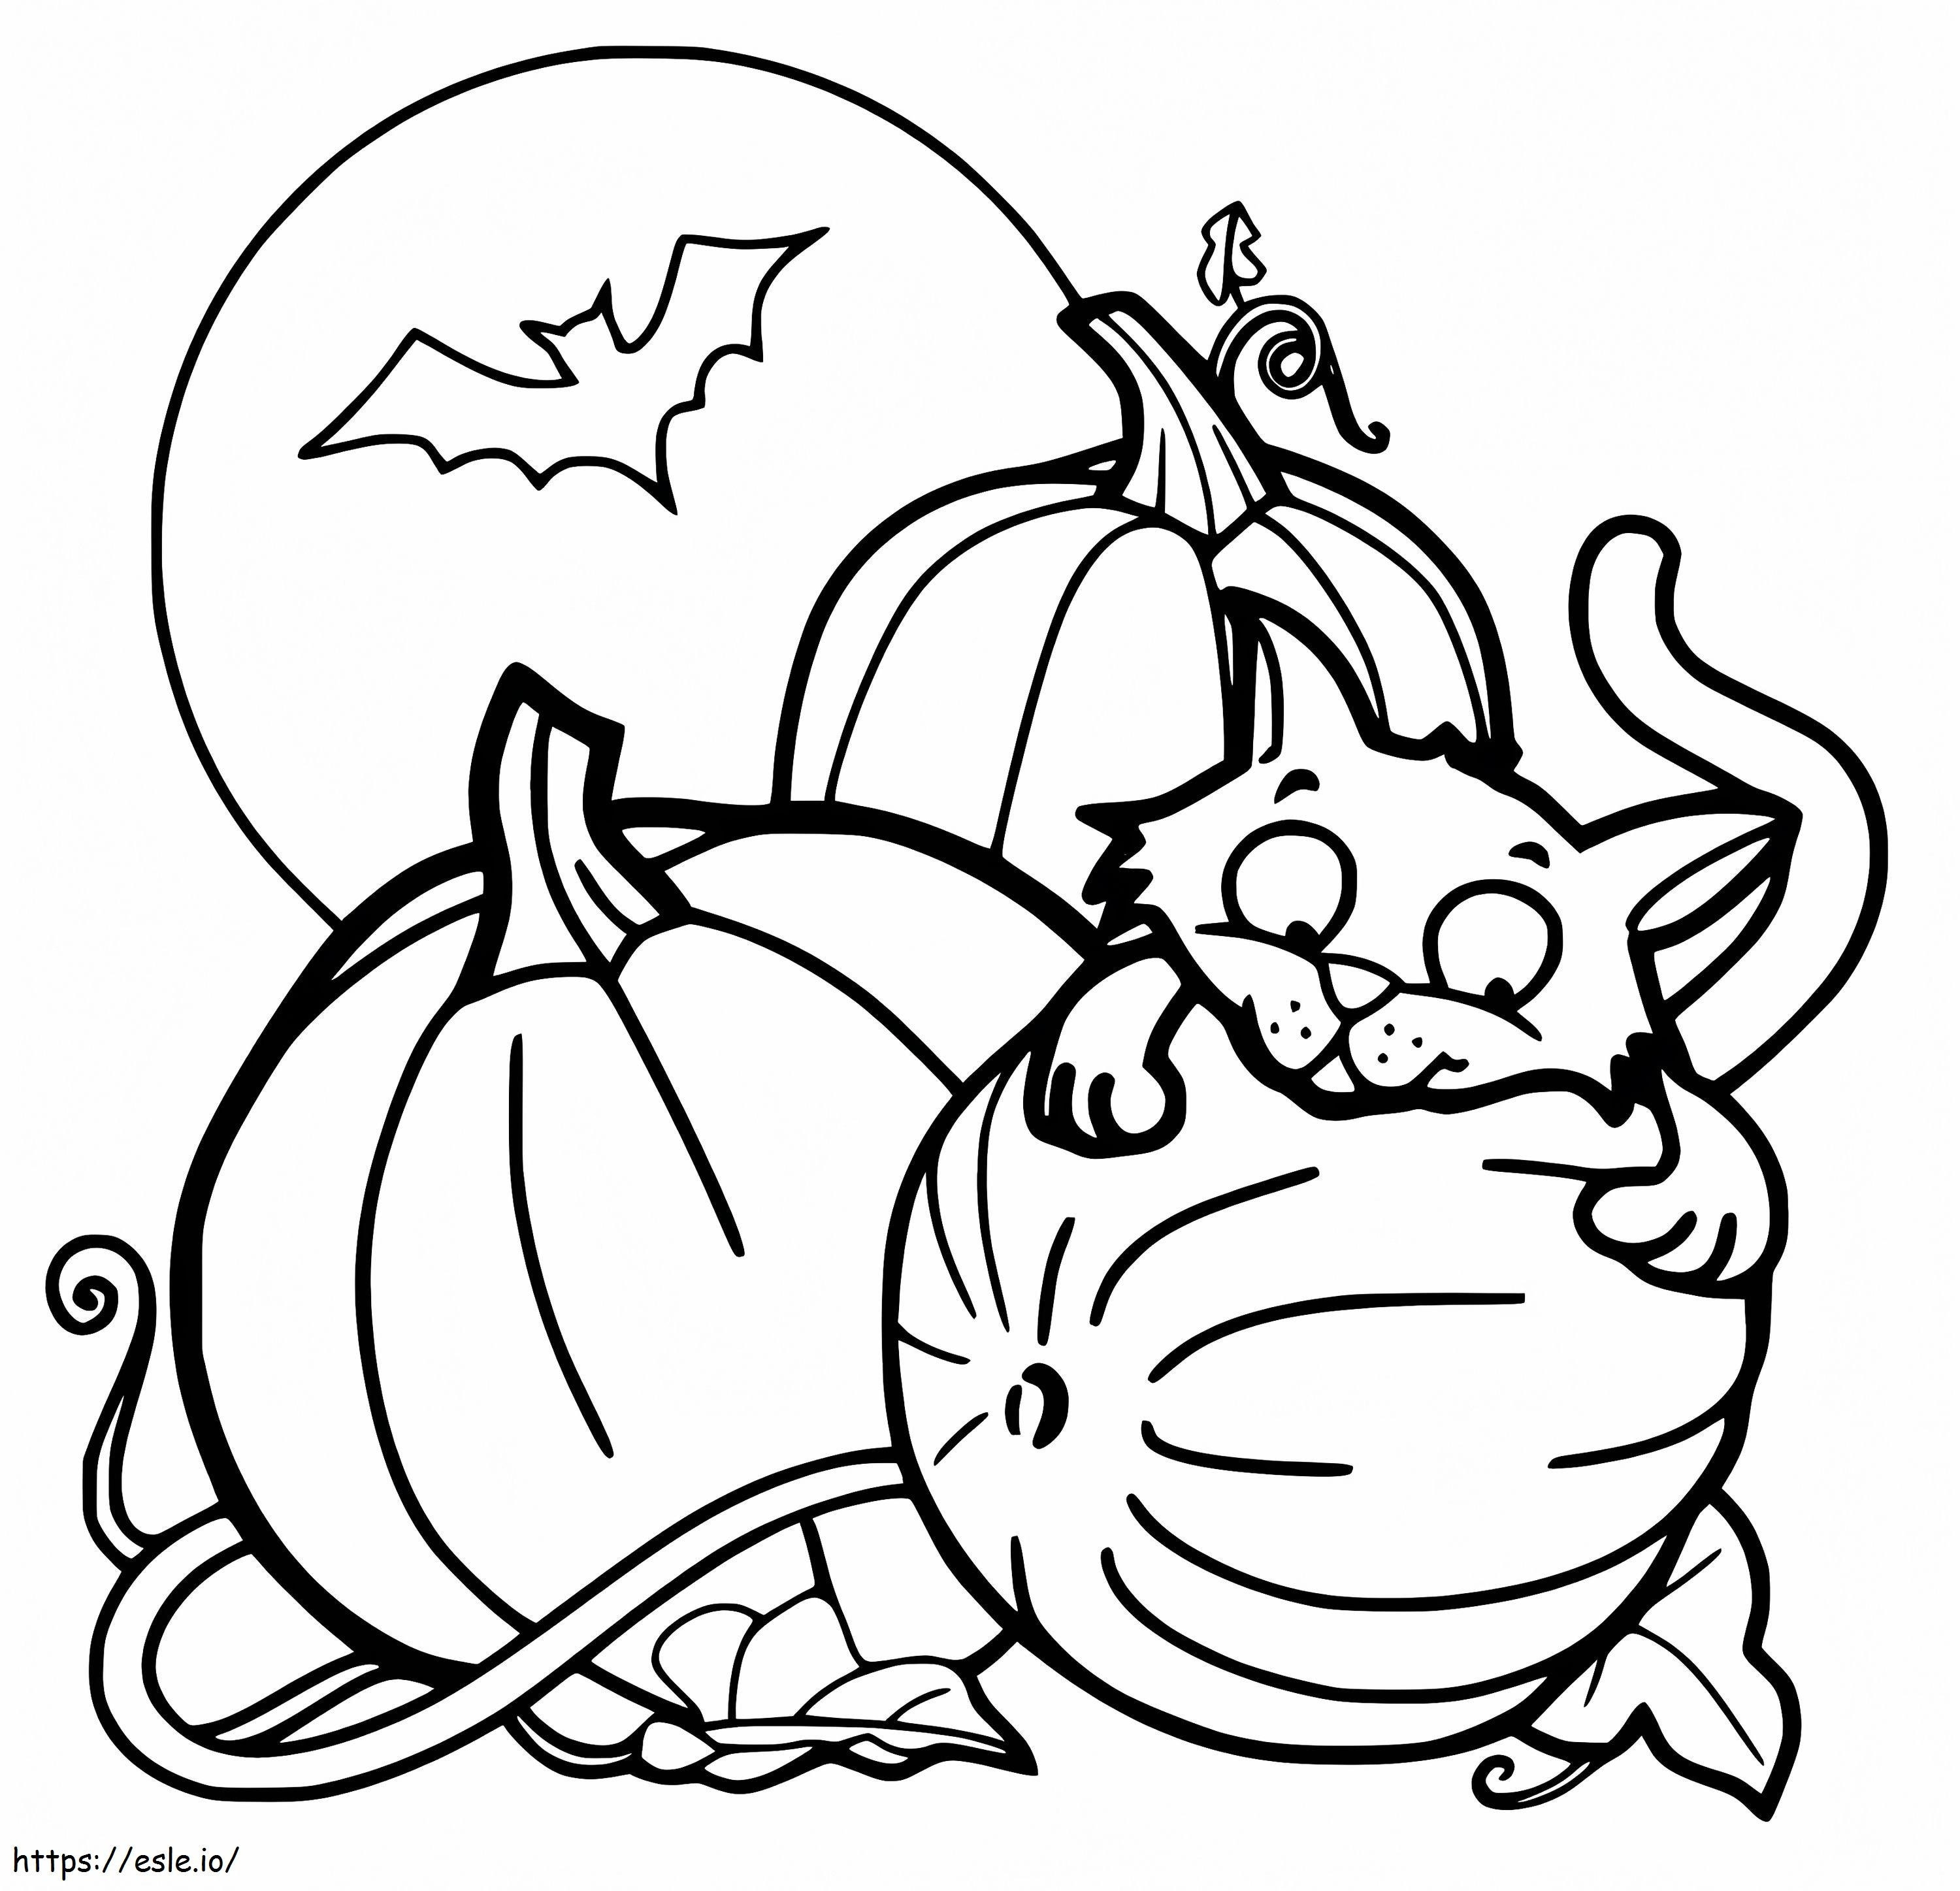 Halween Cat 7 coloring page